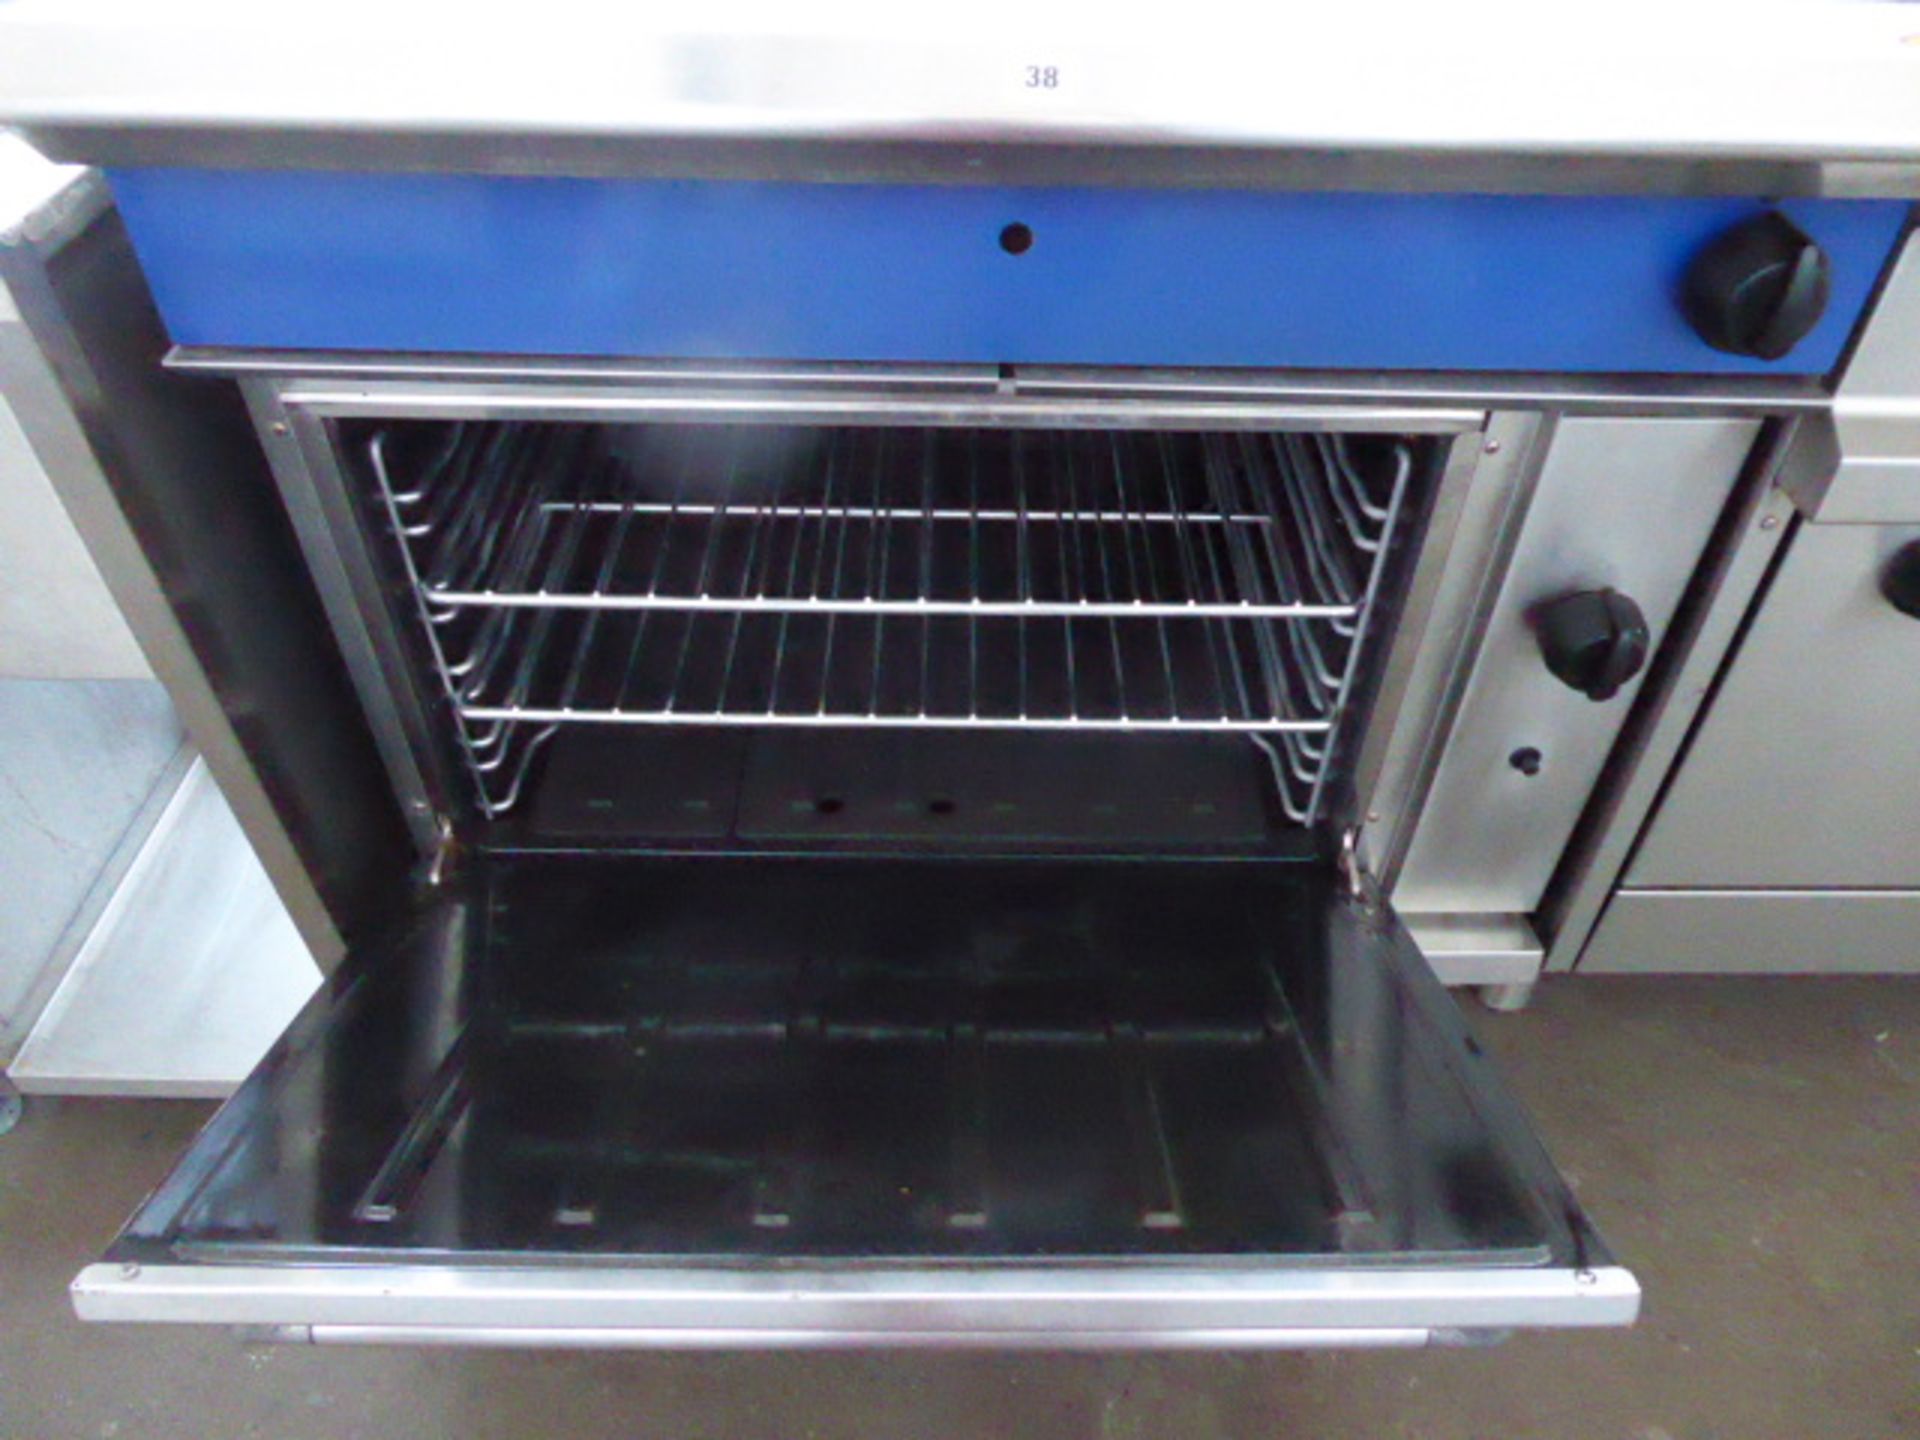 90cm gas Blue Seal solid top bullseye type cooker with large single door oven under - Image 2 of 2